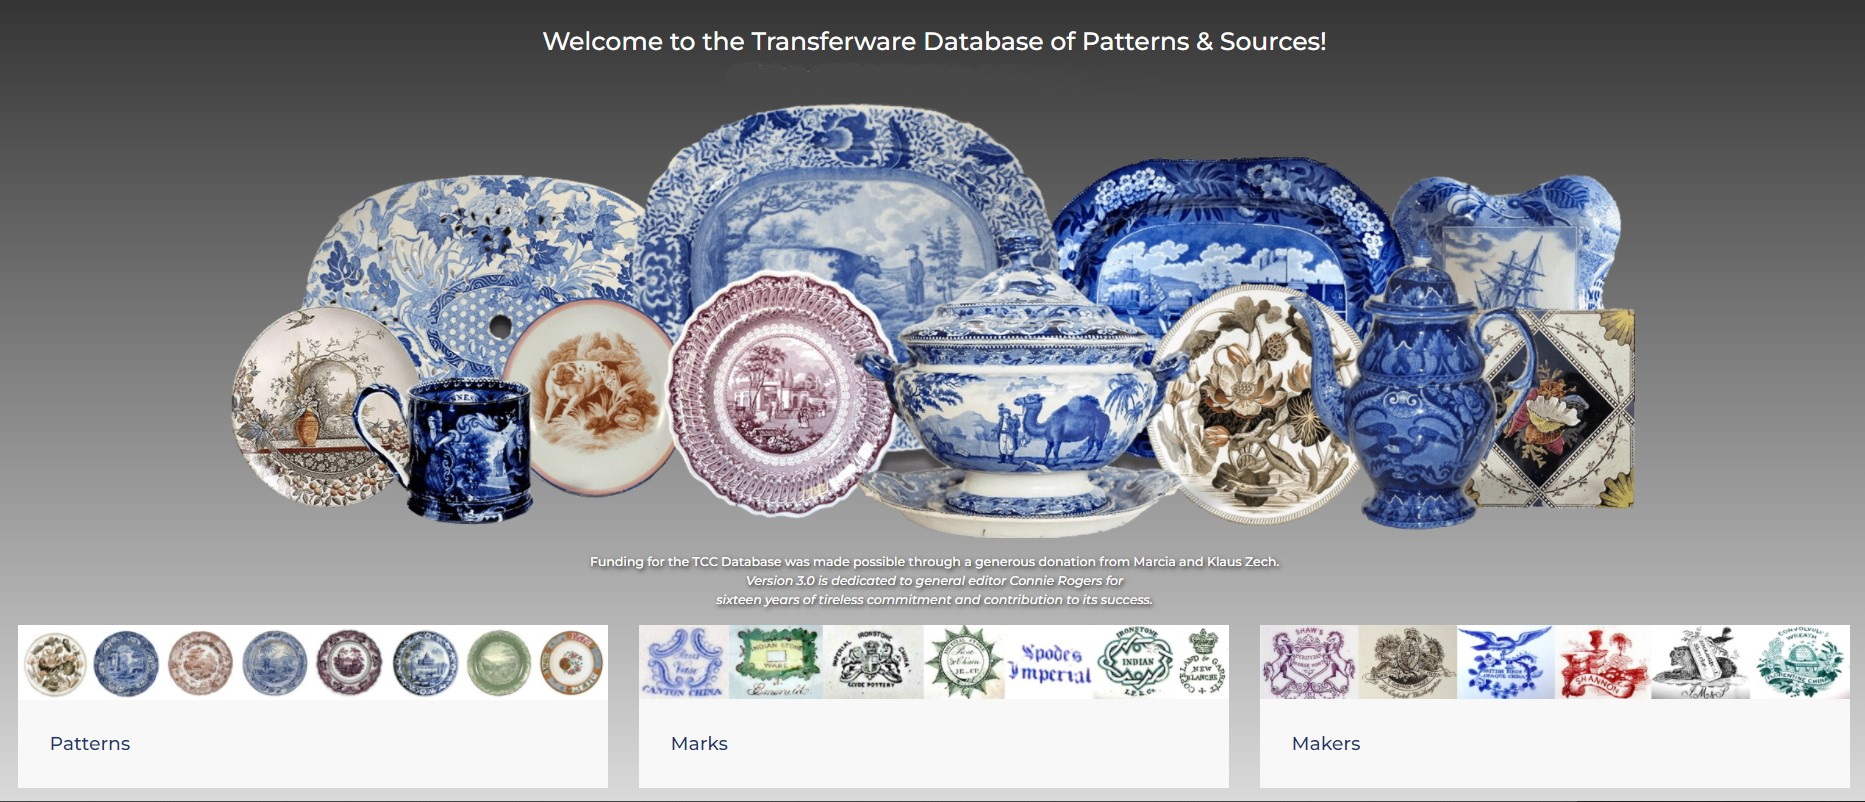 Database Home page